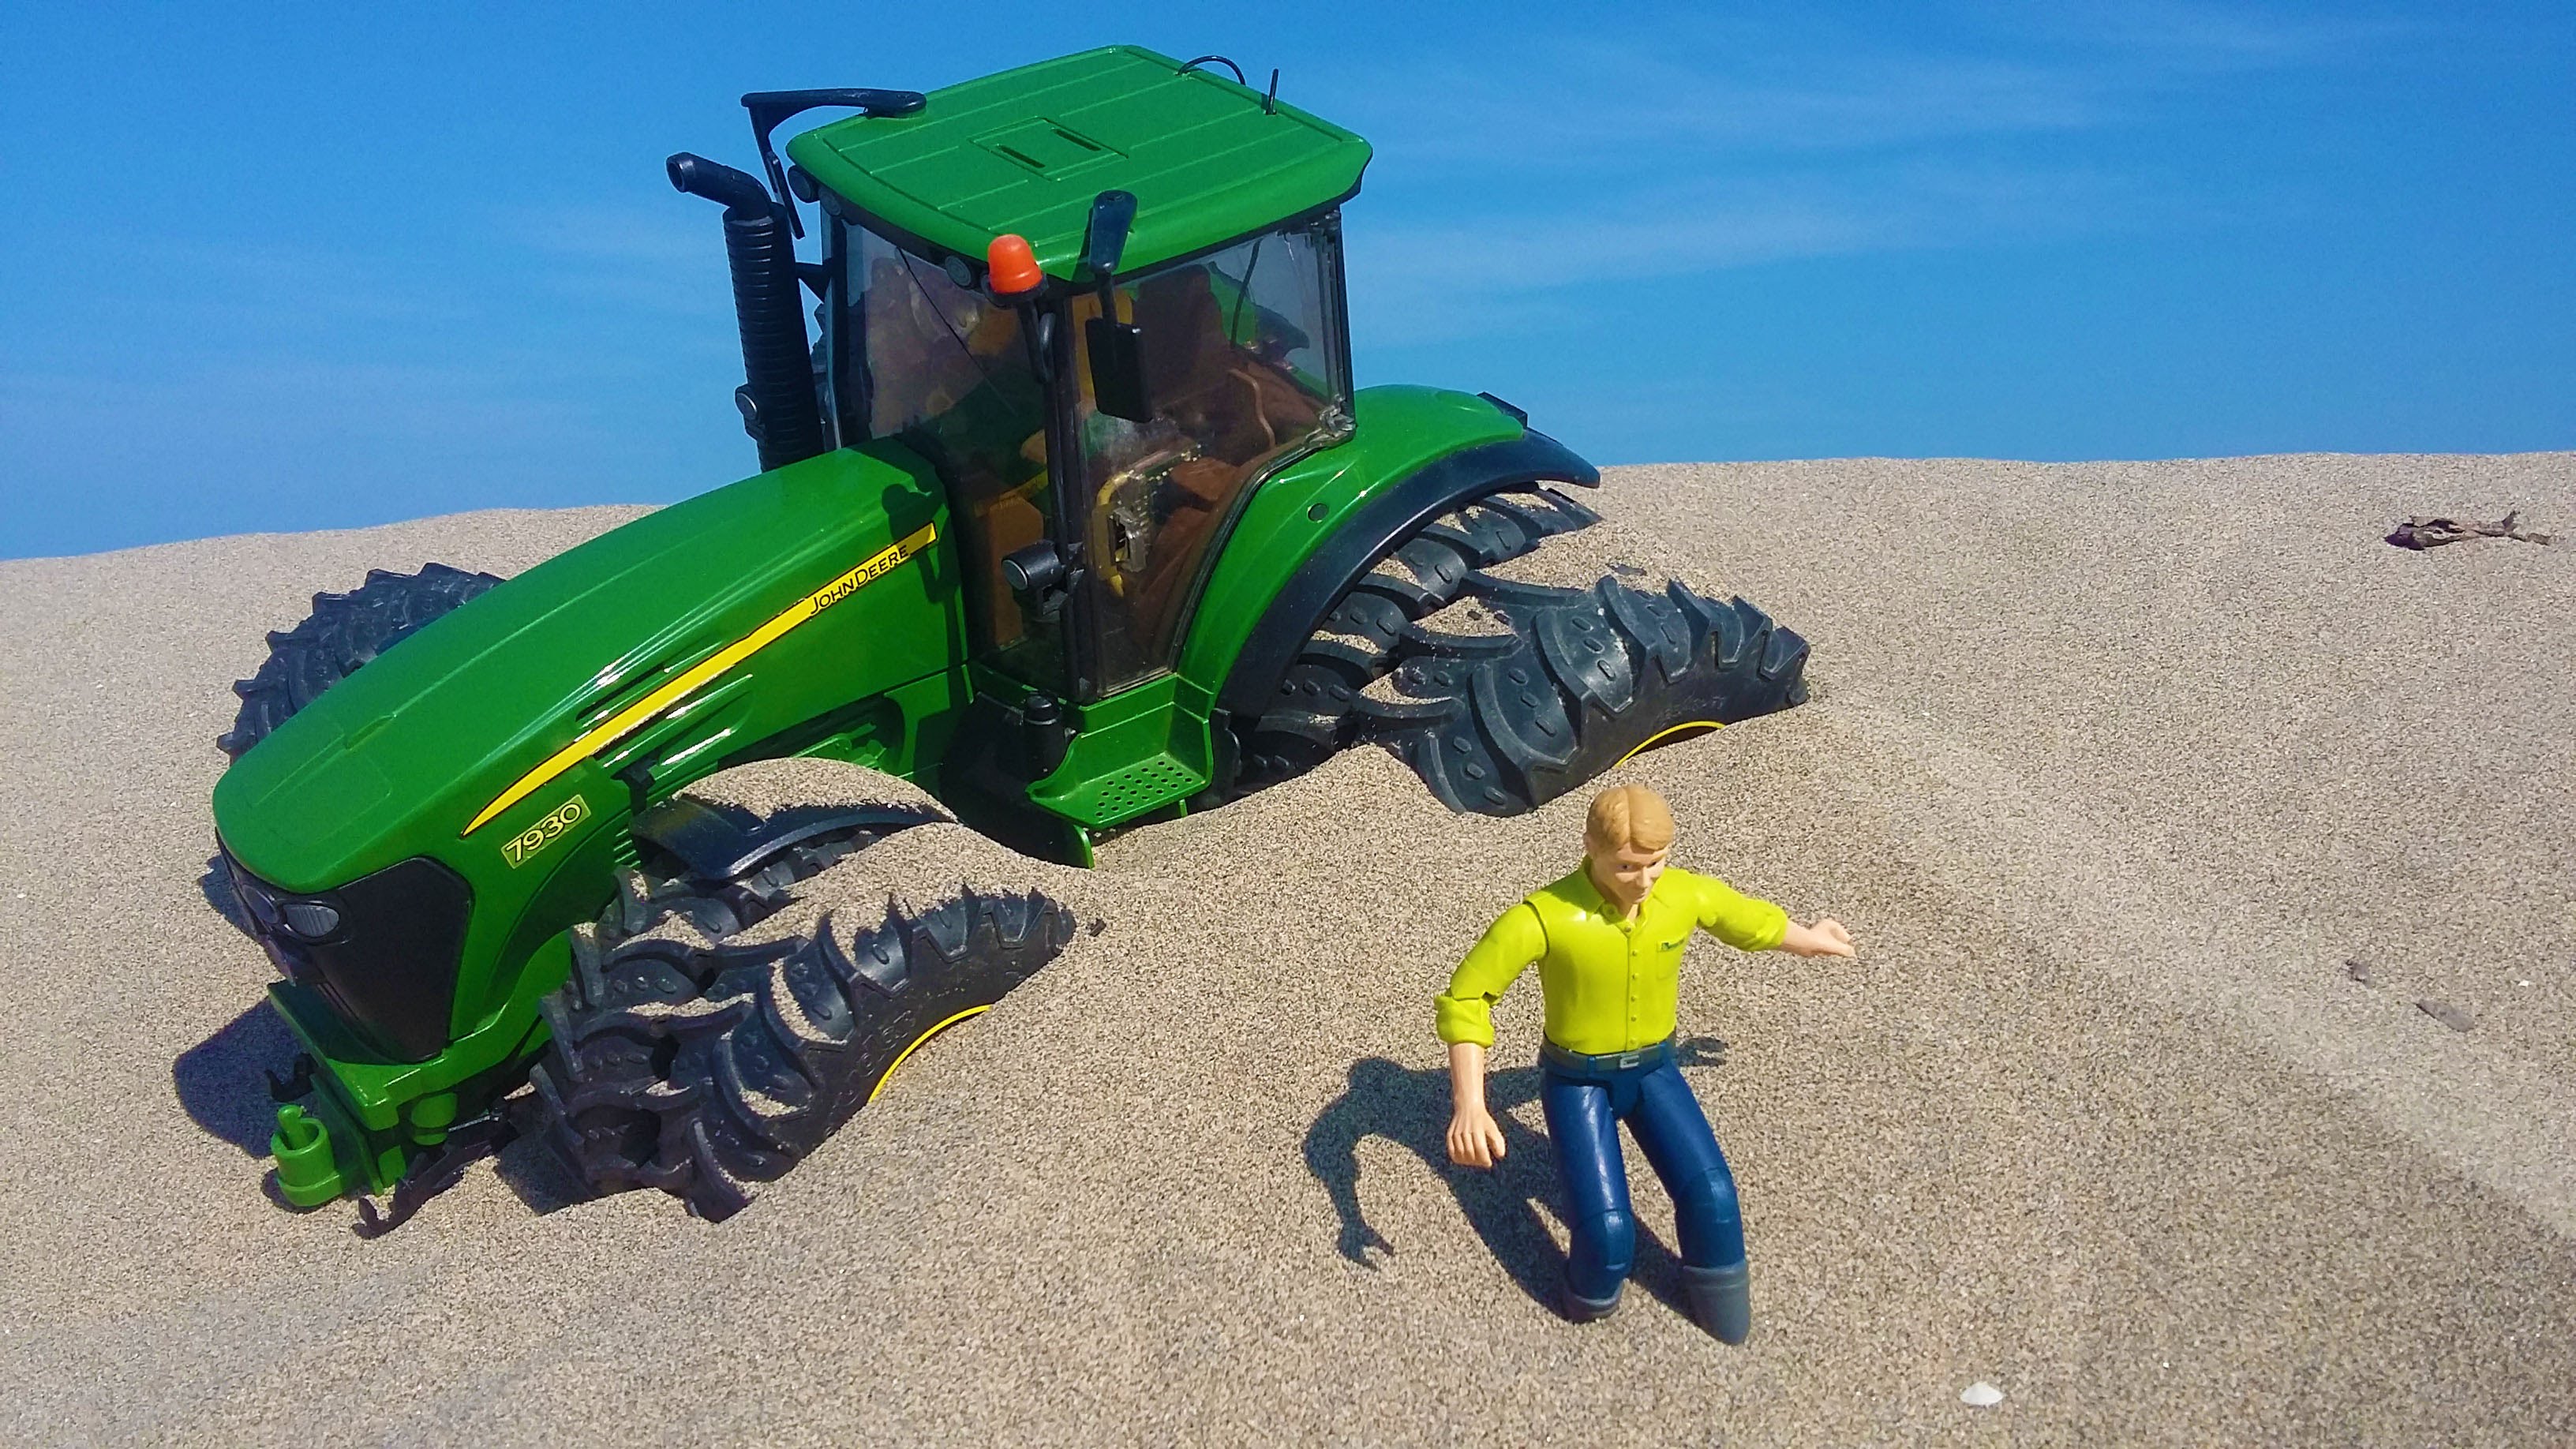 BRUDER tractor BEACH ride! R/C Tractor sand action - YouTube